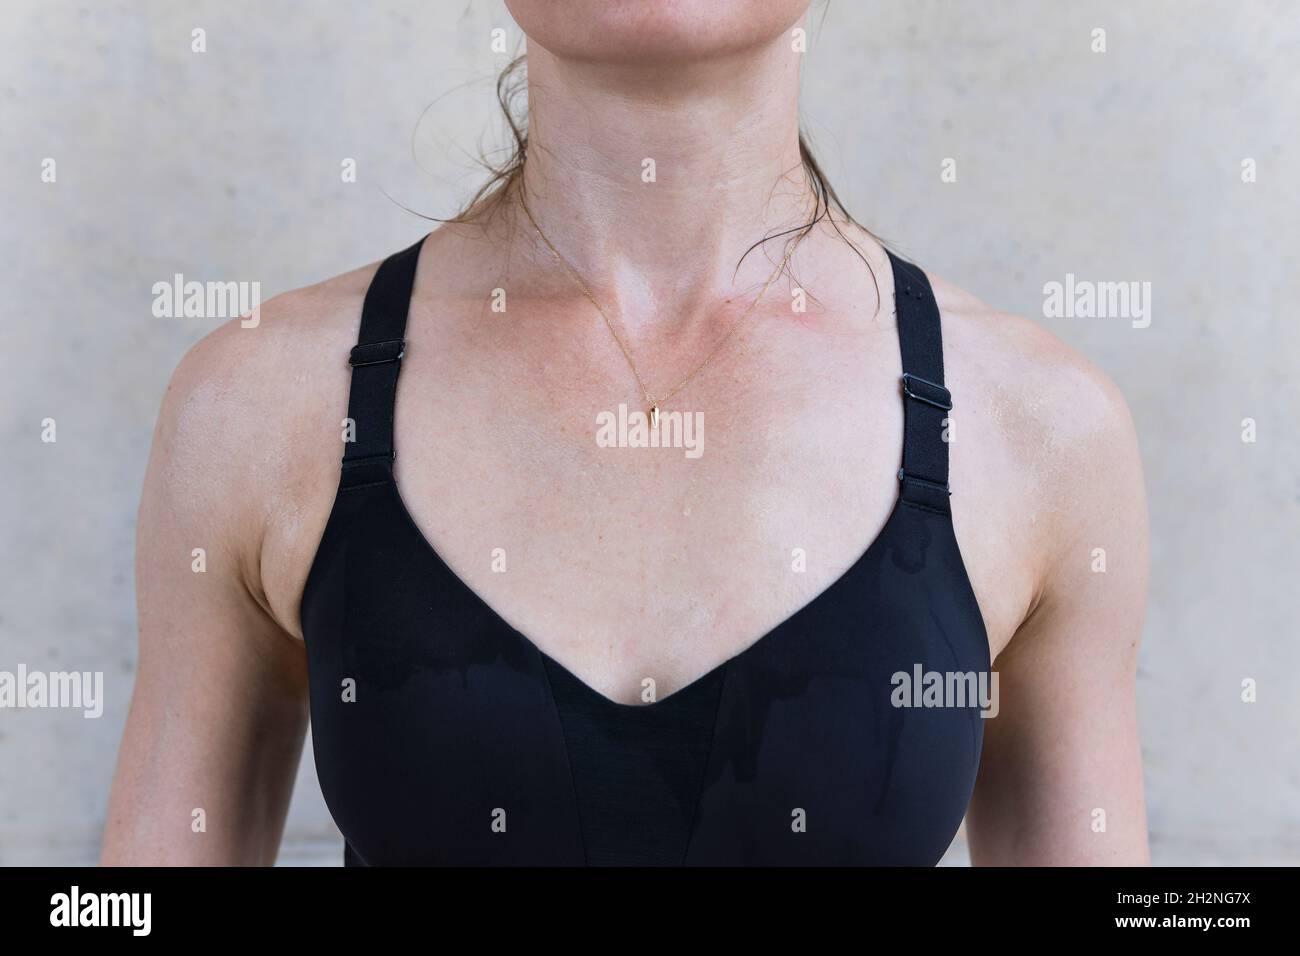 Female athlete wearing sports bra in front of wall Stock Photo